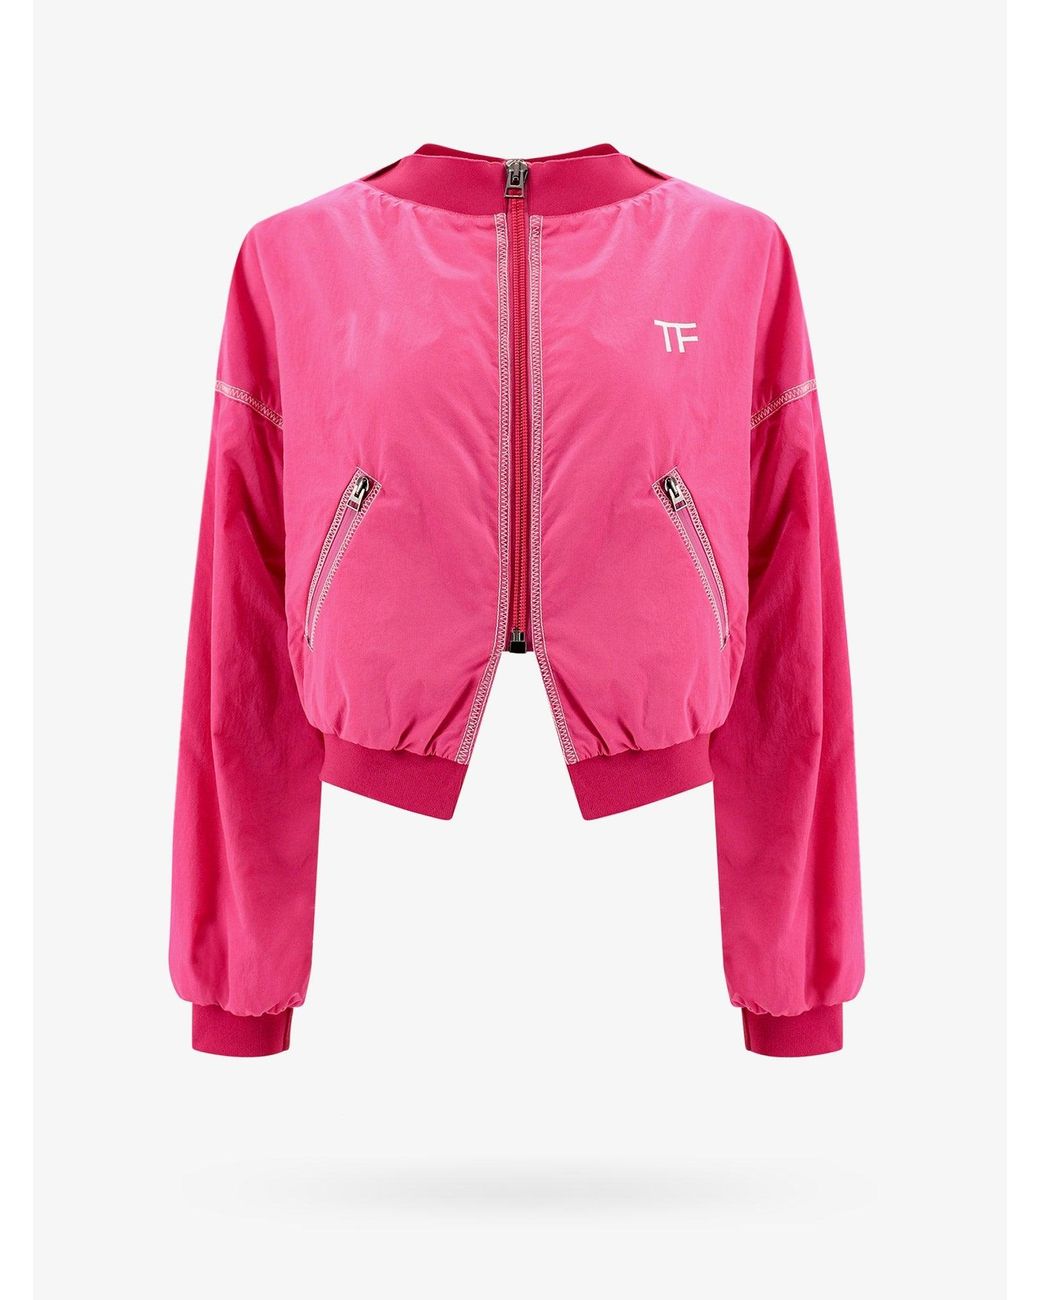 Tom Ford Closure With Zip Stitched Profile Jackets in Pink | Lyst